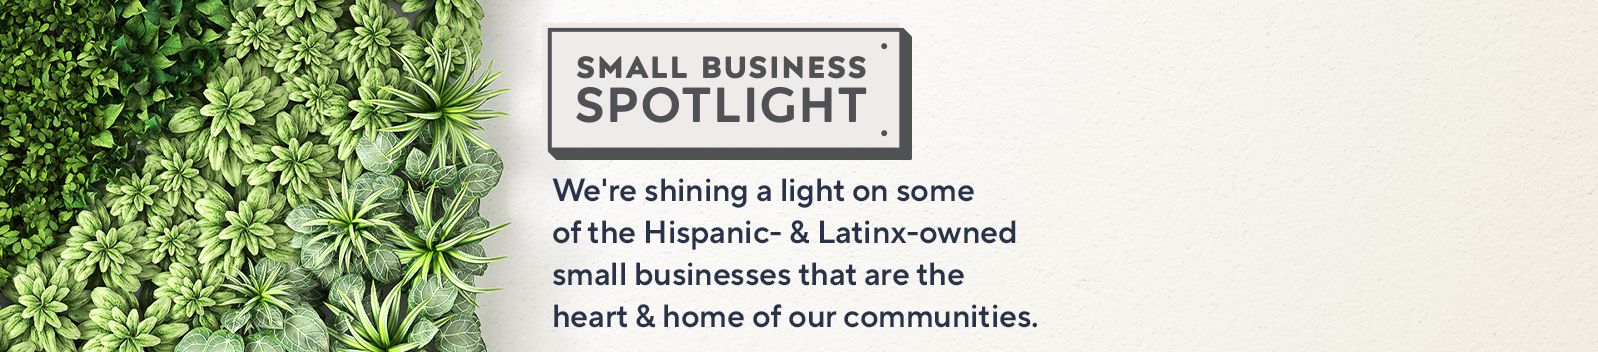 Small Business Spotlight - We're shining a light on some of the Hispanic- & Latinx-owned small businesses that are the heart & home of our communities.